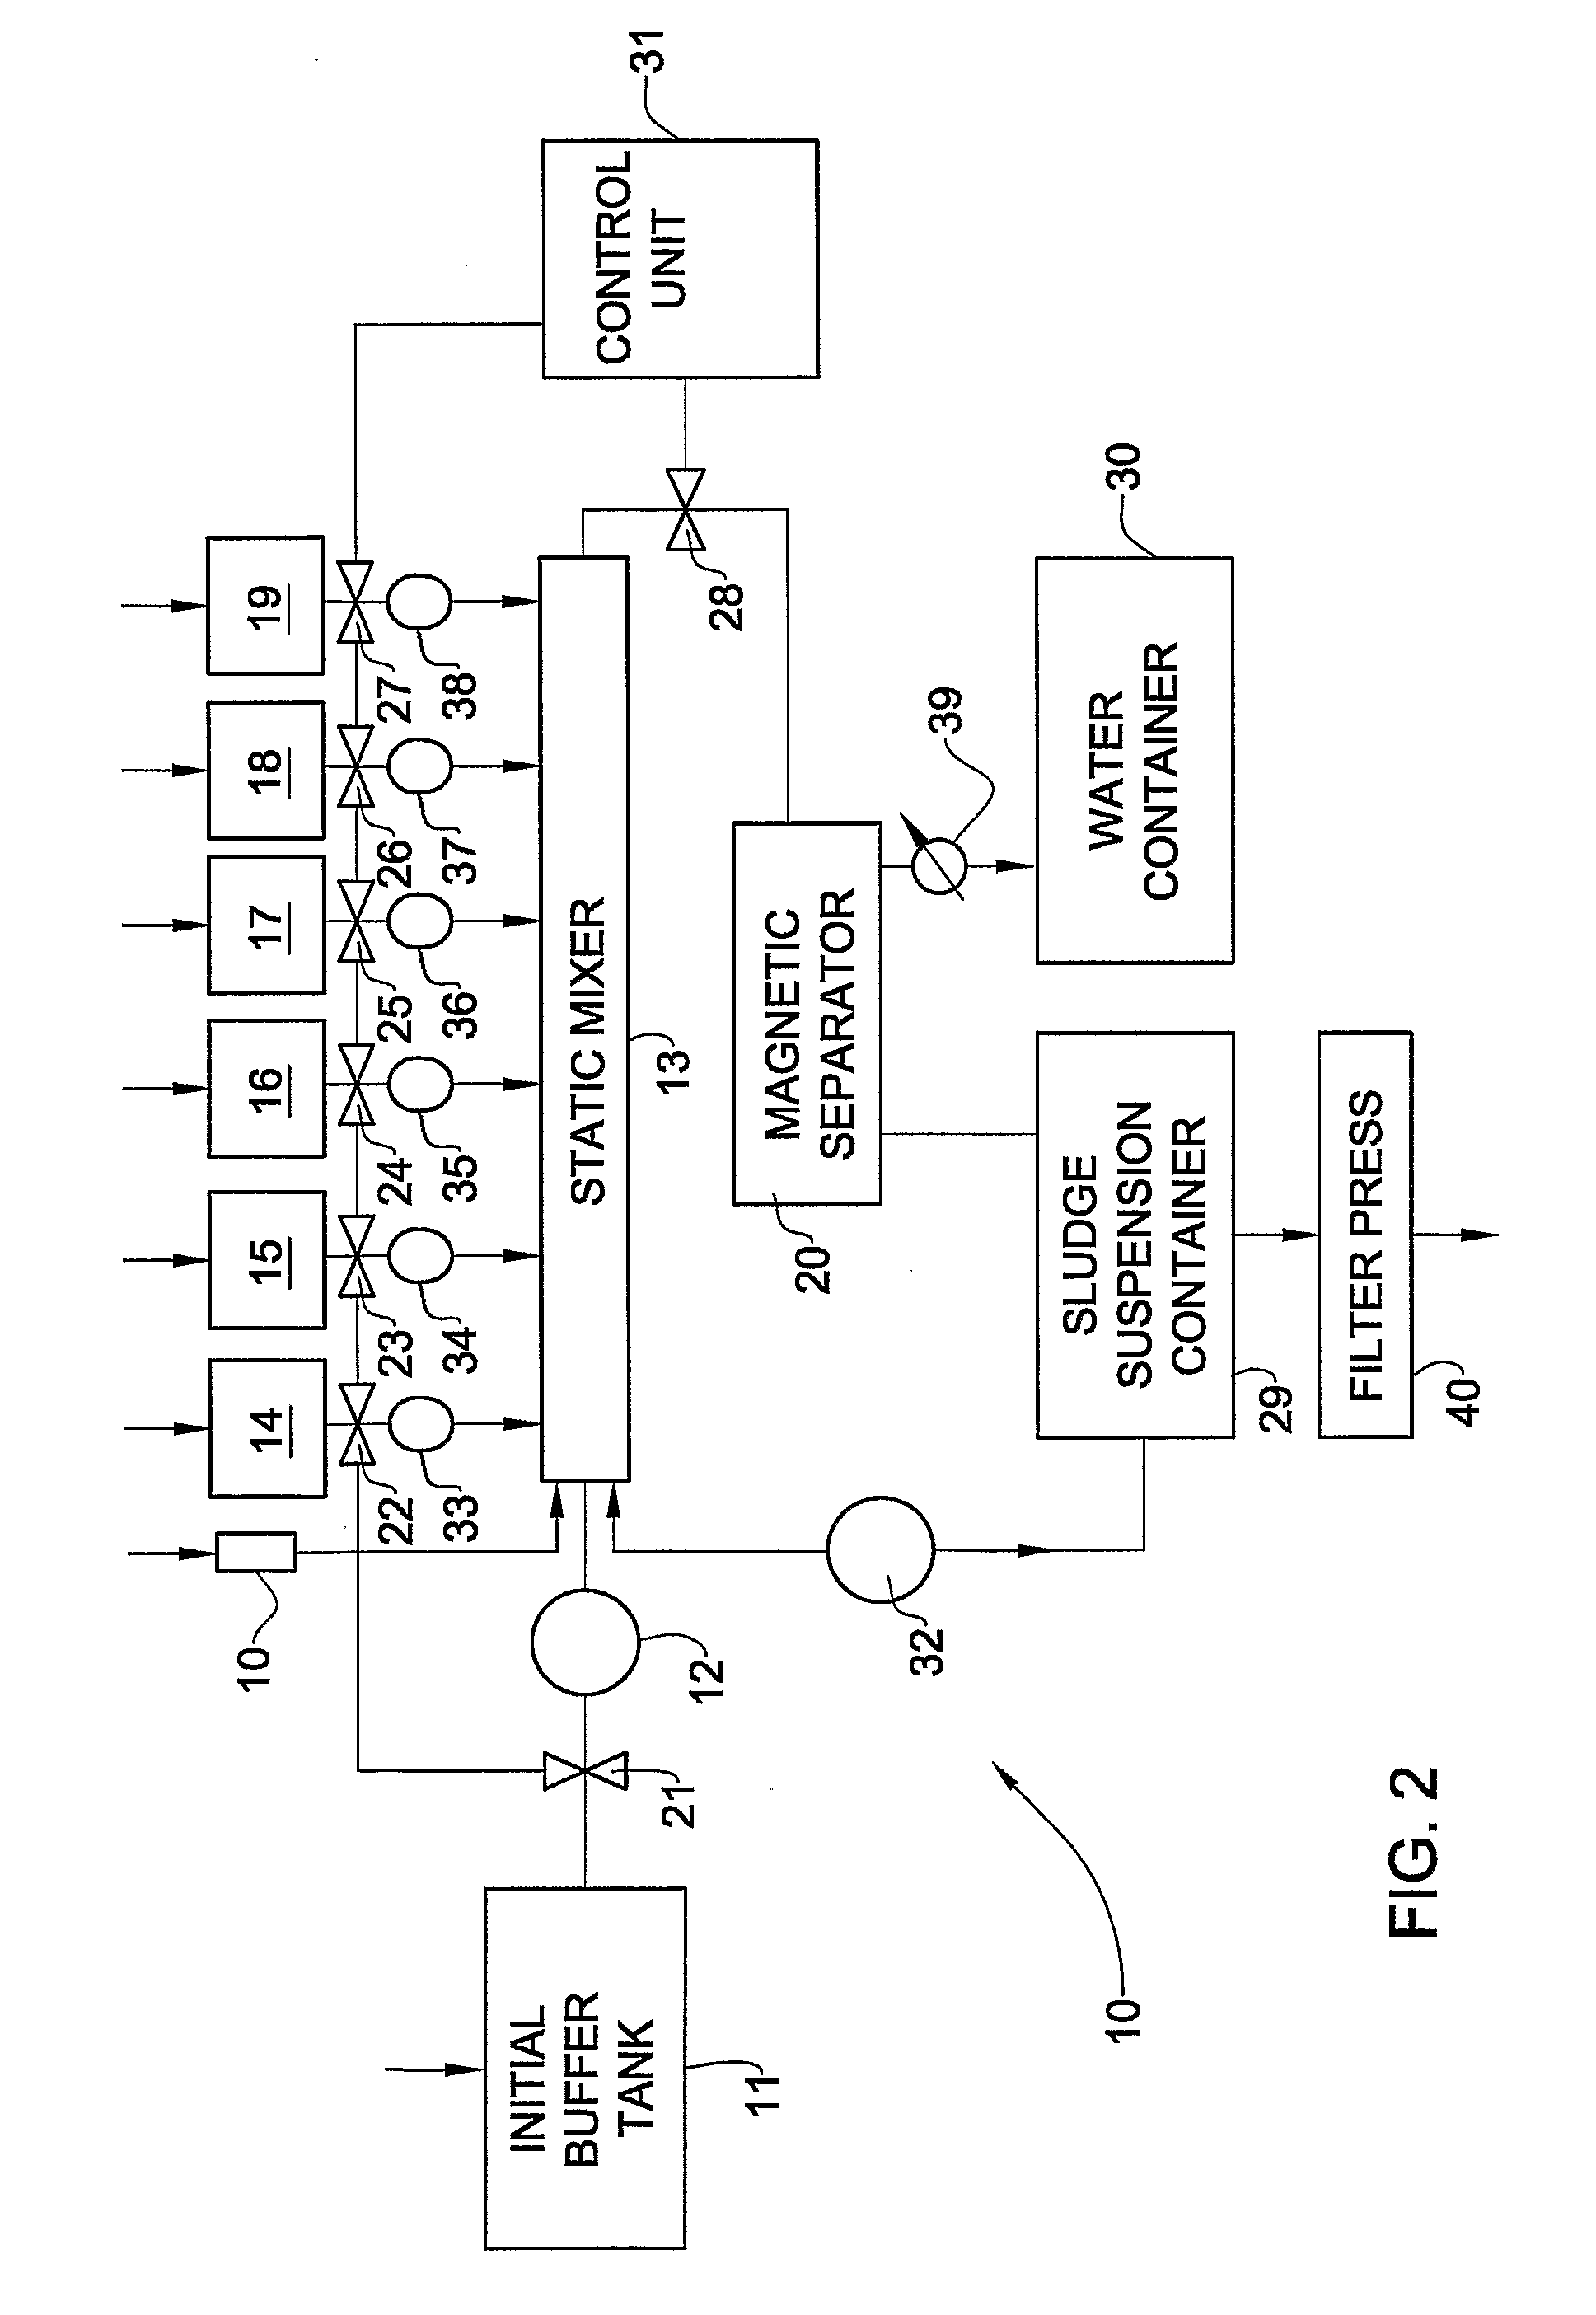 System and Method for Treatment of Industrial Wastewater